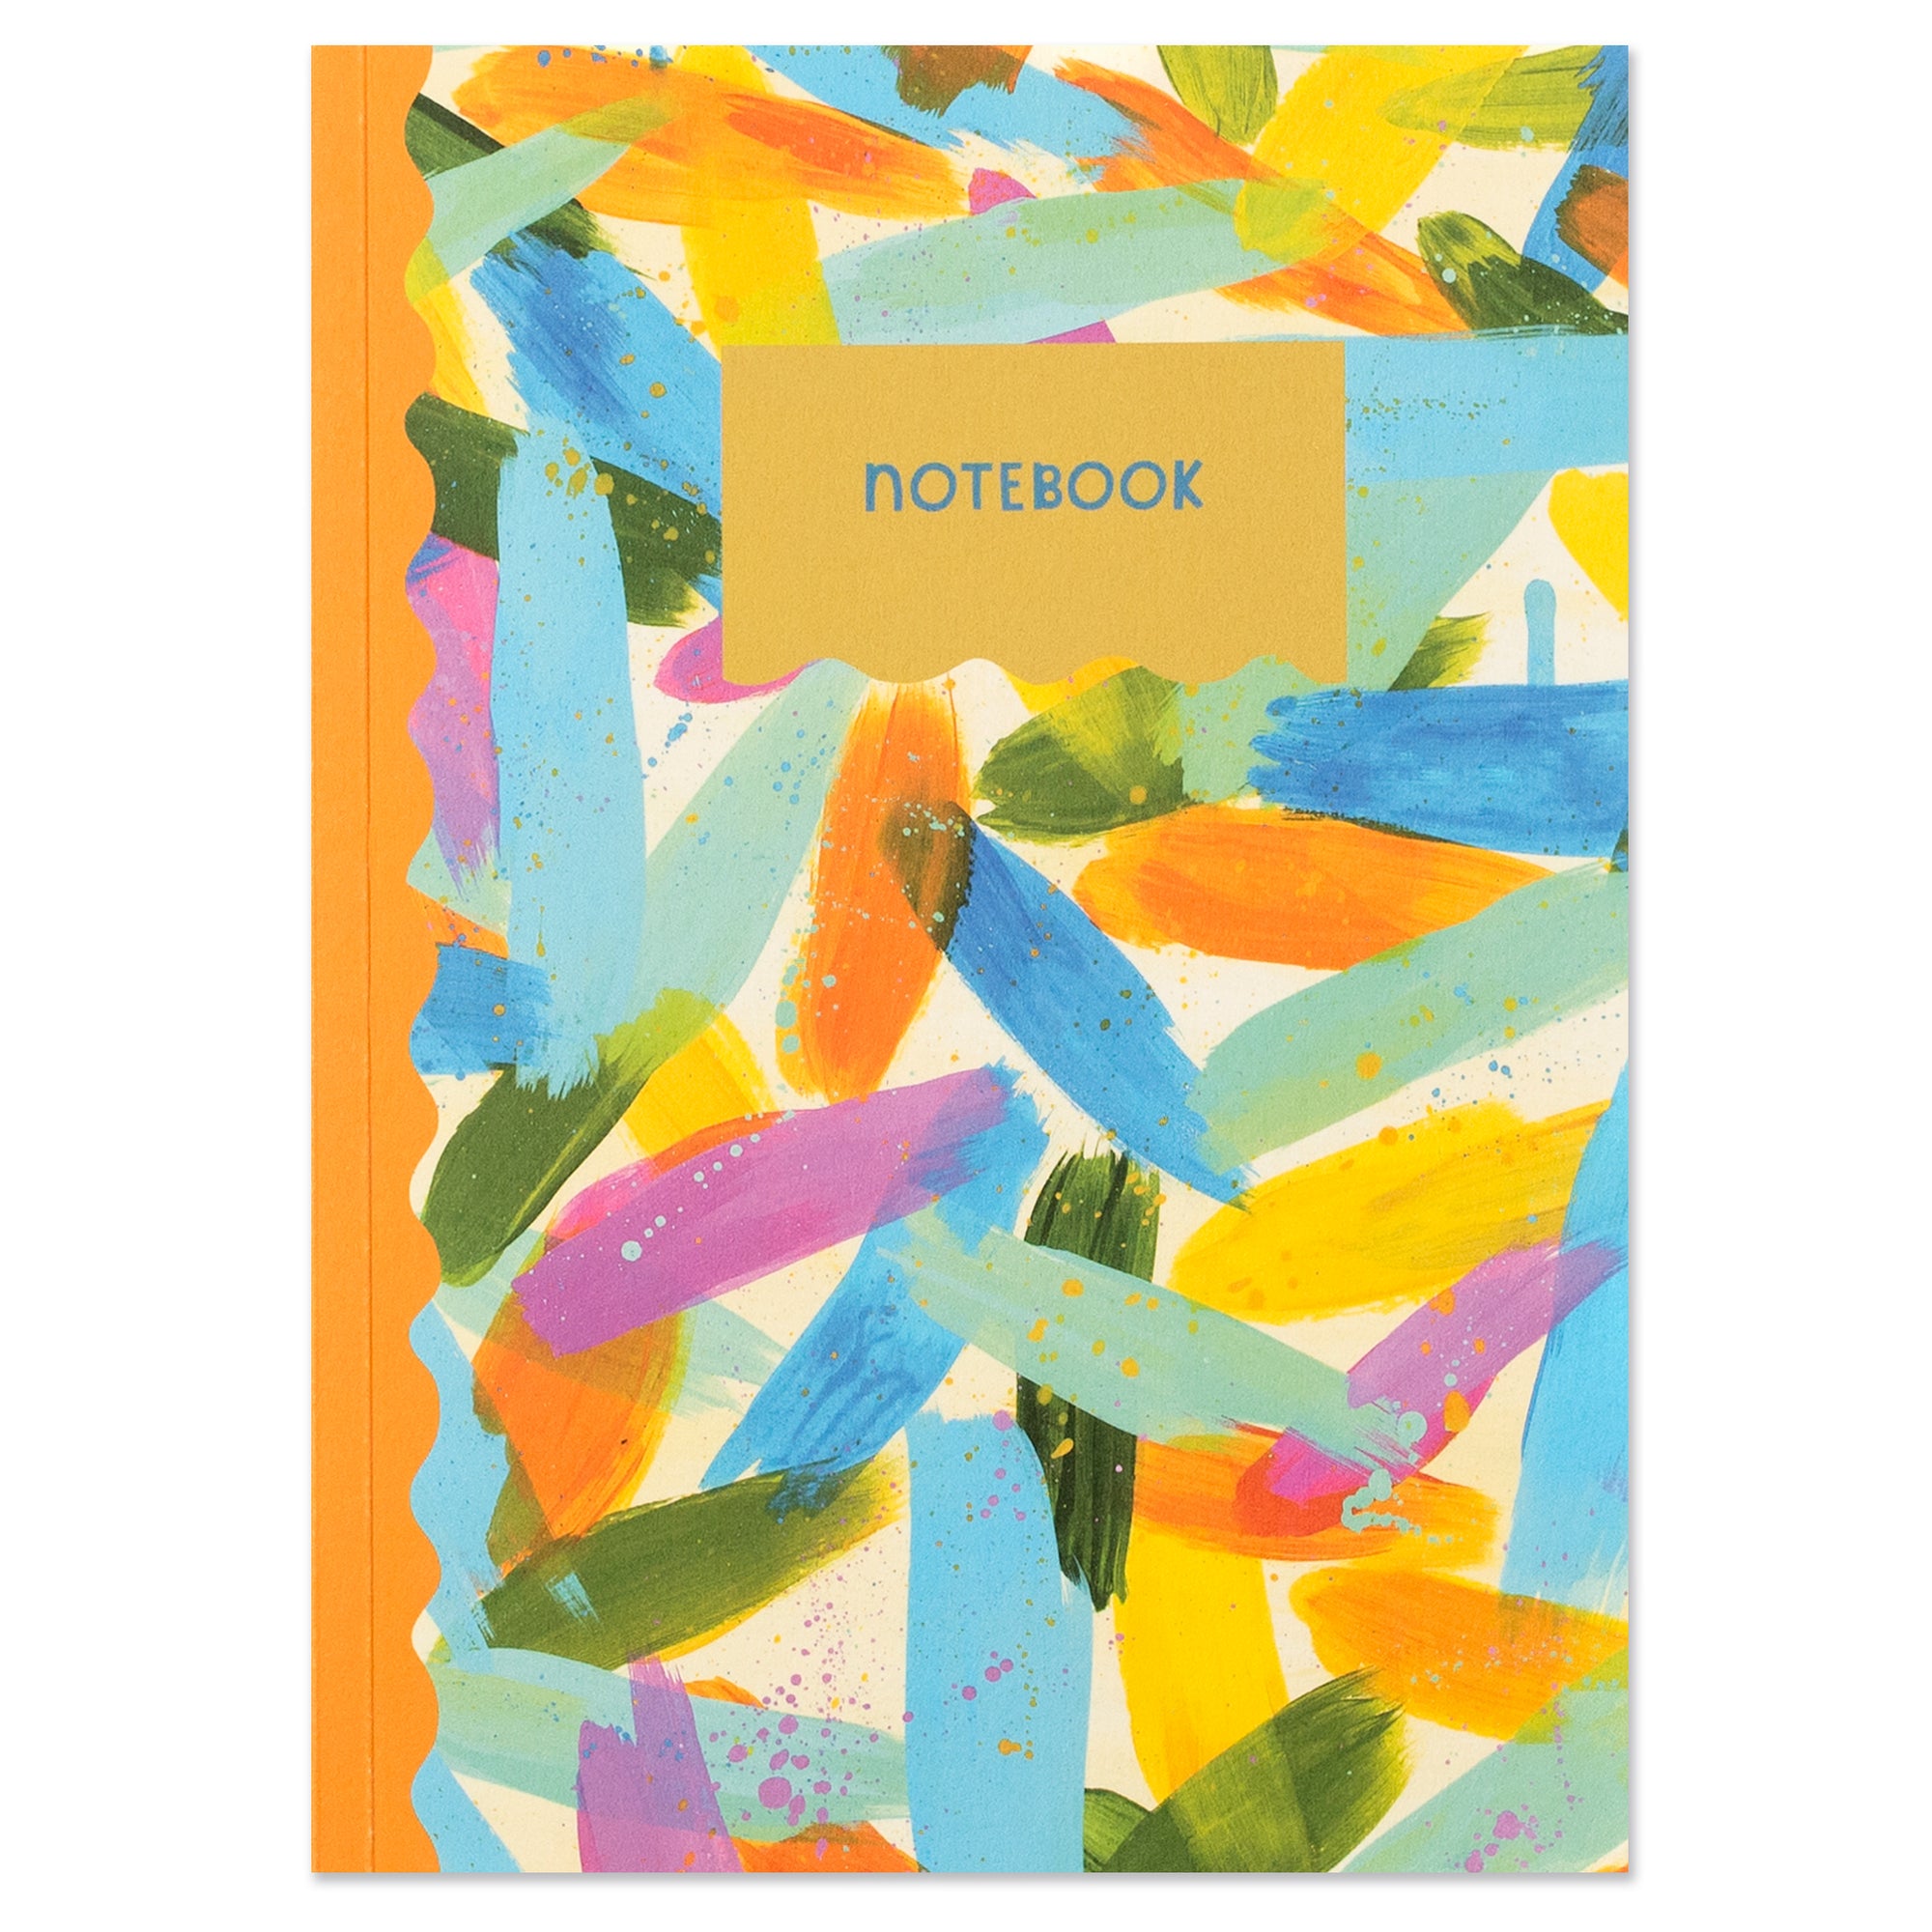 A colourful and patterned rectangular notebook. The image shows the front of the notebook - it has a scalloped bright orange binding edge and a gold box in the middle of the upper half with the word notebook in blue. The main pattern is a hand painted abstract design with long dashes.